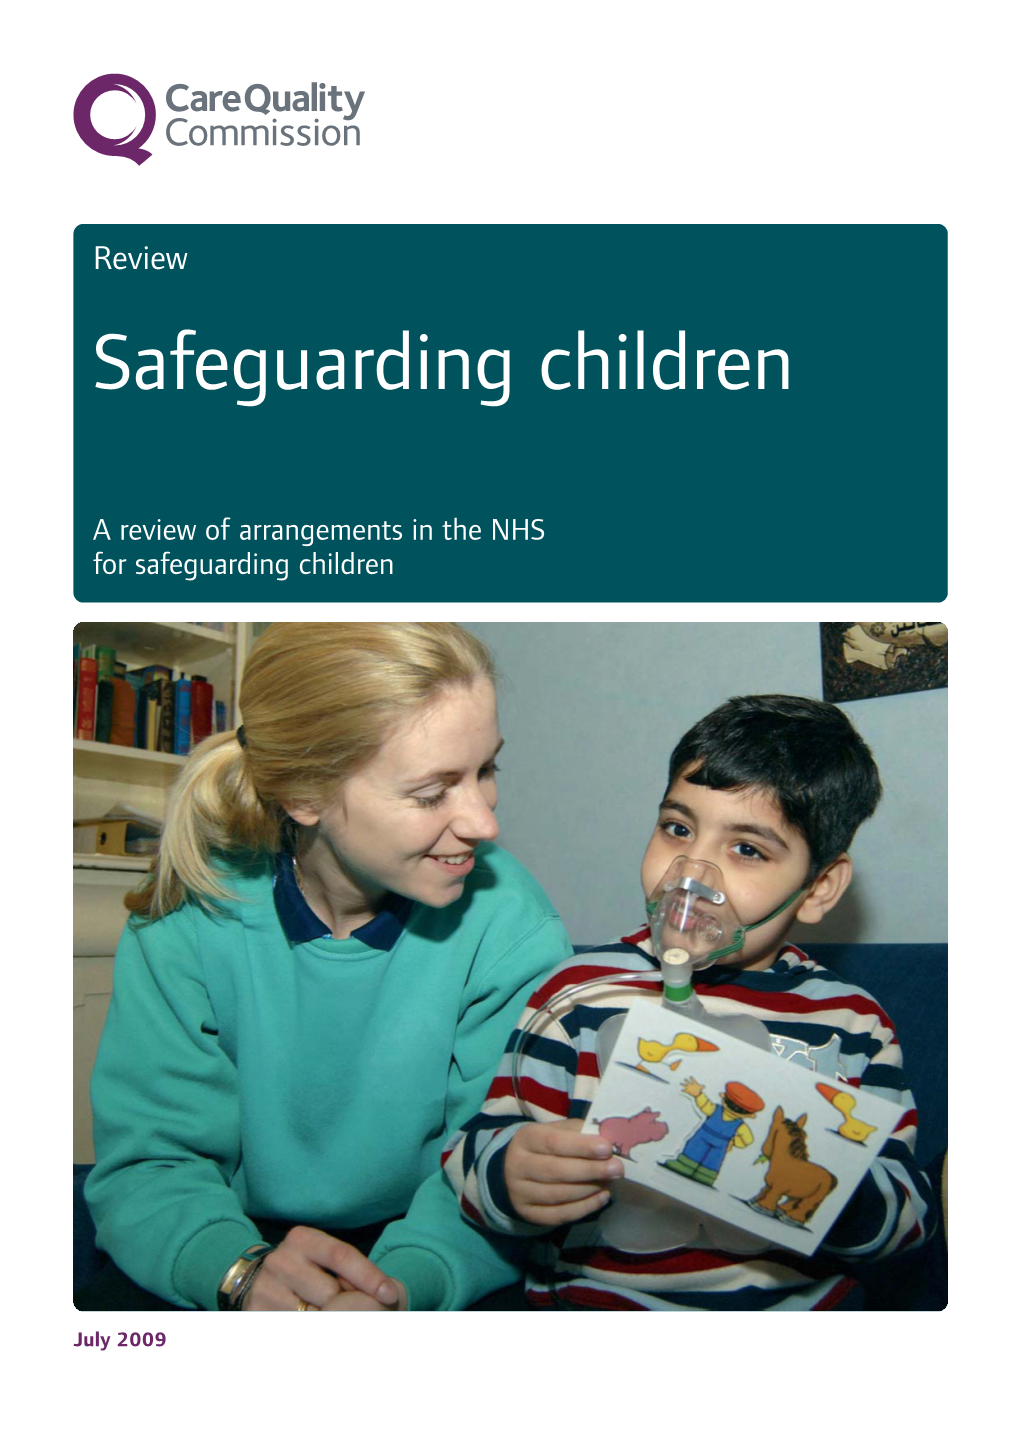 A Review of Arrangements in the NHS for Safeguarding Children